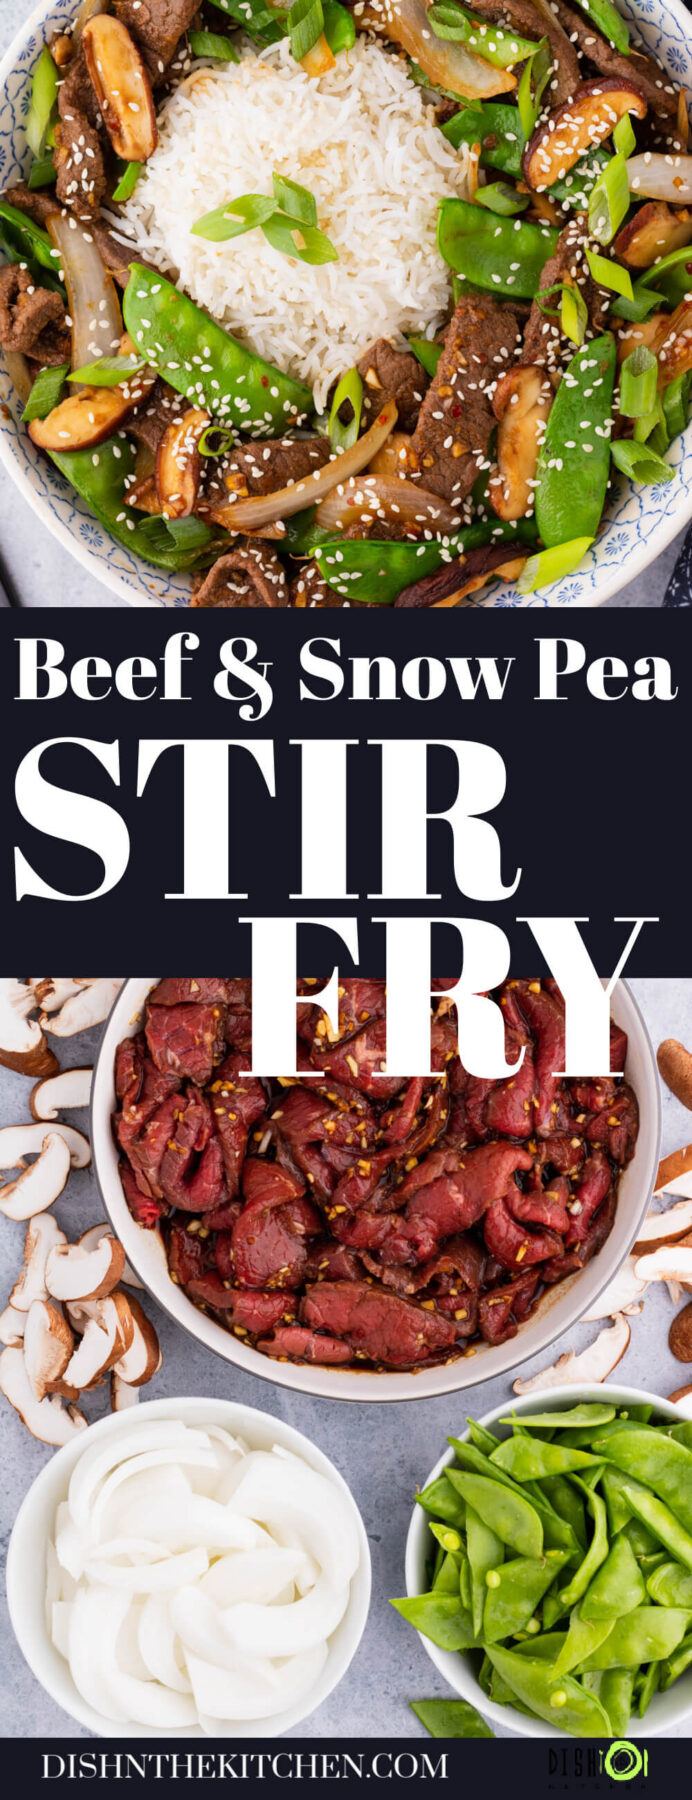 Pinterest image featuring marinating beef and a delicious beef stir fry with snow peas, onions, and shiitake mushrooms.